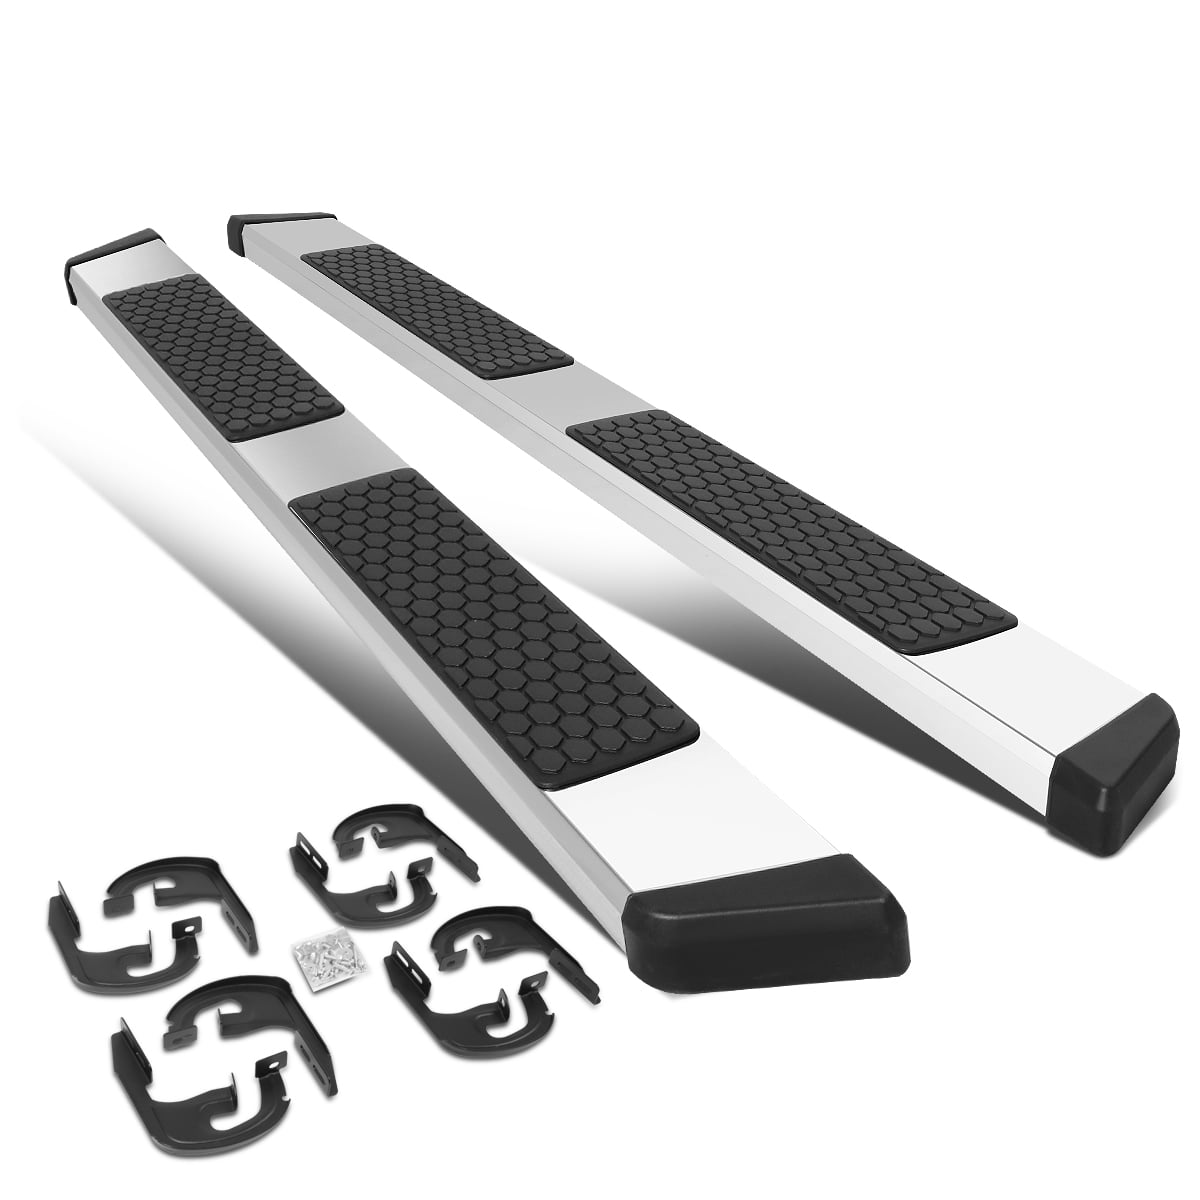 For 2019 to 2020 Chevy Silverado / GMC Sierra Crew Cab Pair 5" Chrome Stainless Steel Flat Step Stainless Steel Running Boards For Chevy Silverado